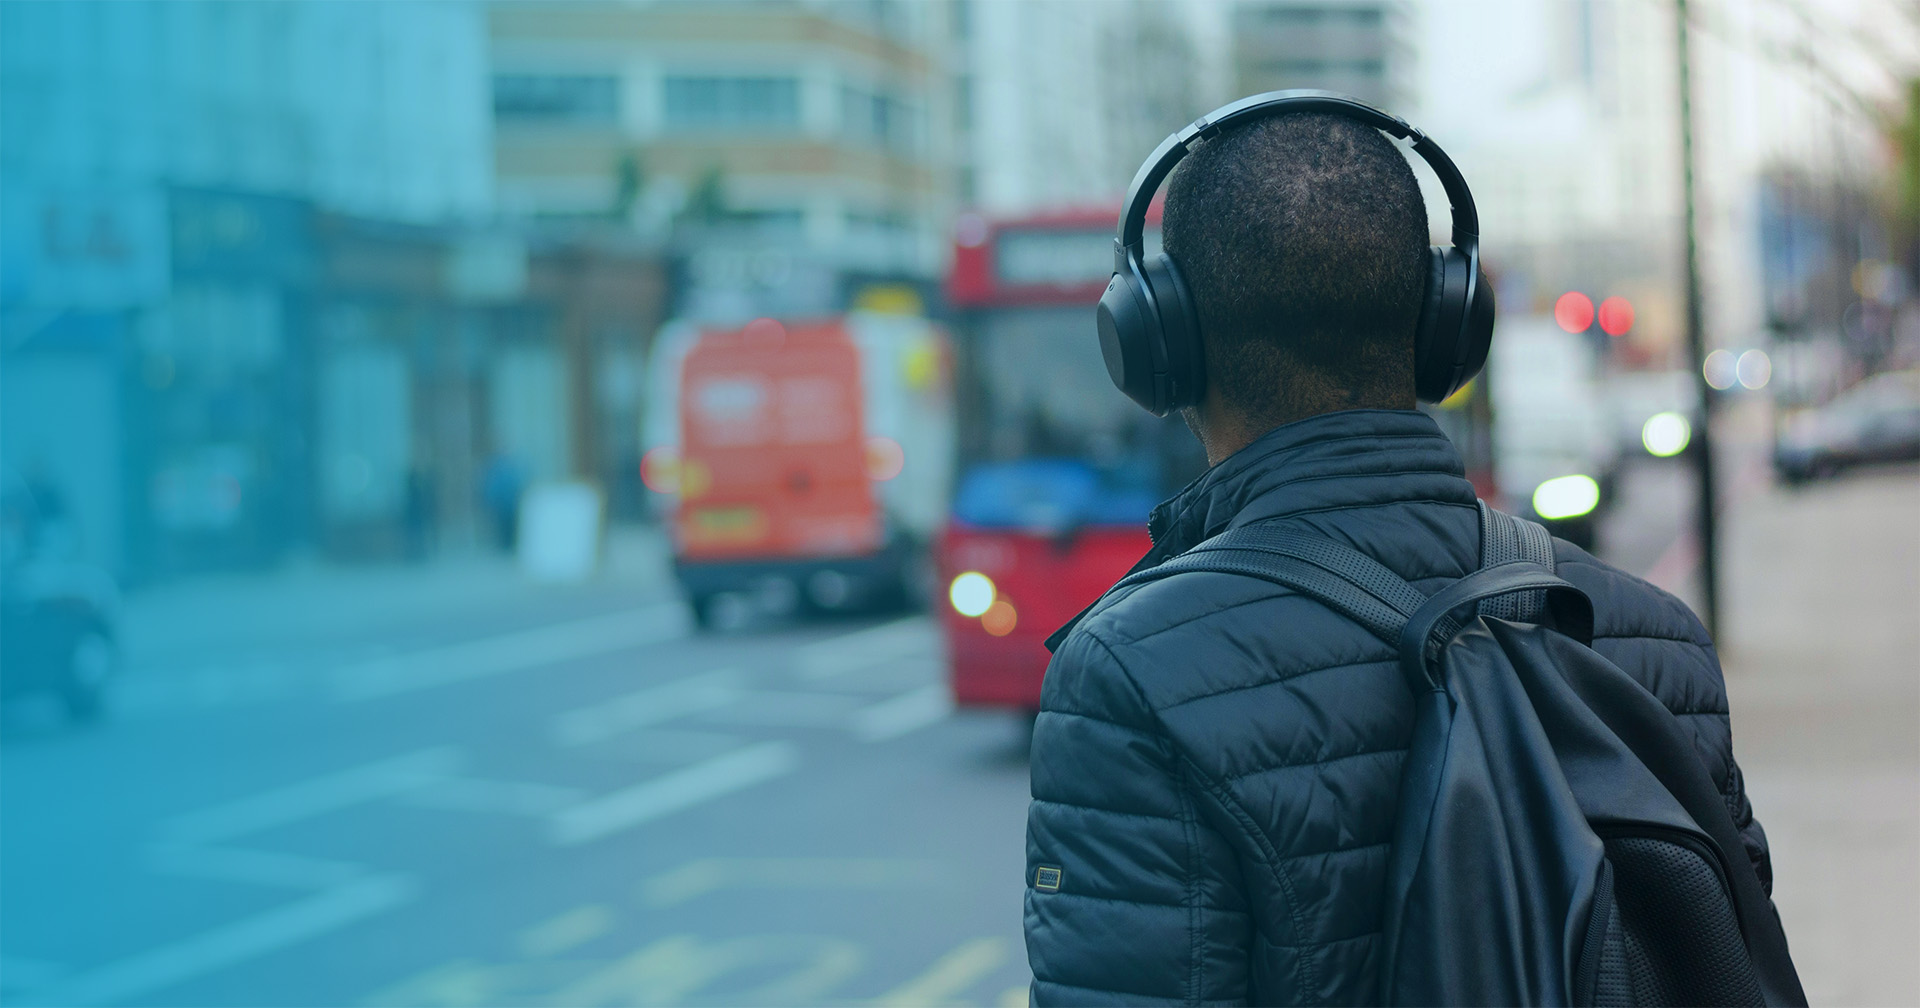 Man on a city street wearing over-the-ear headphones